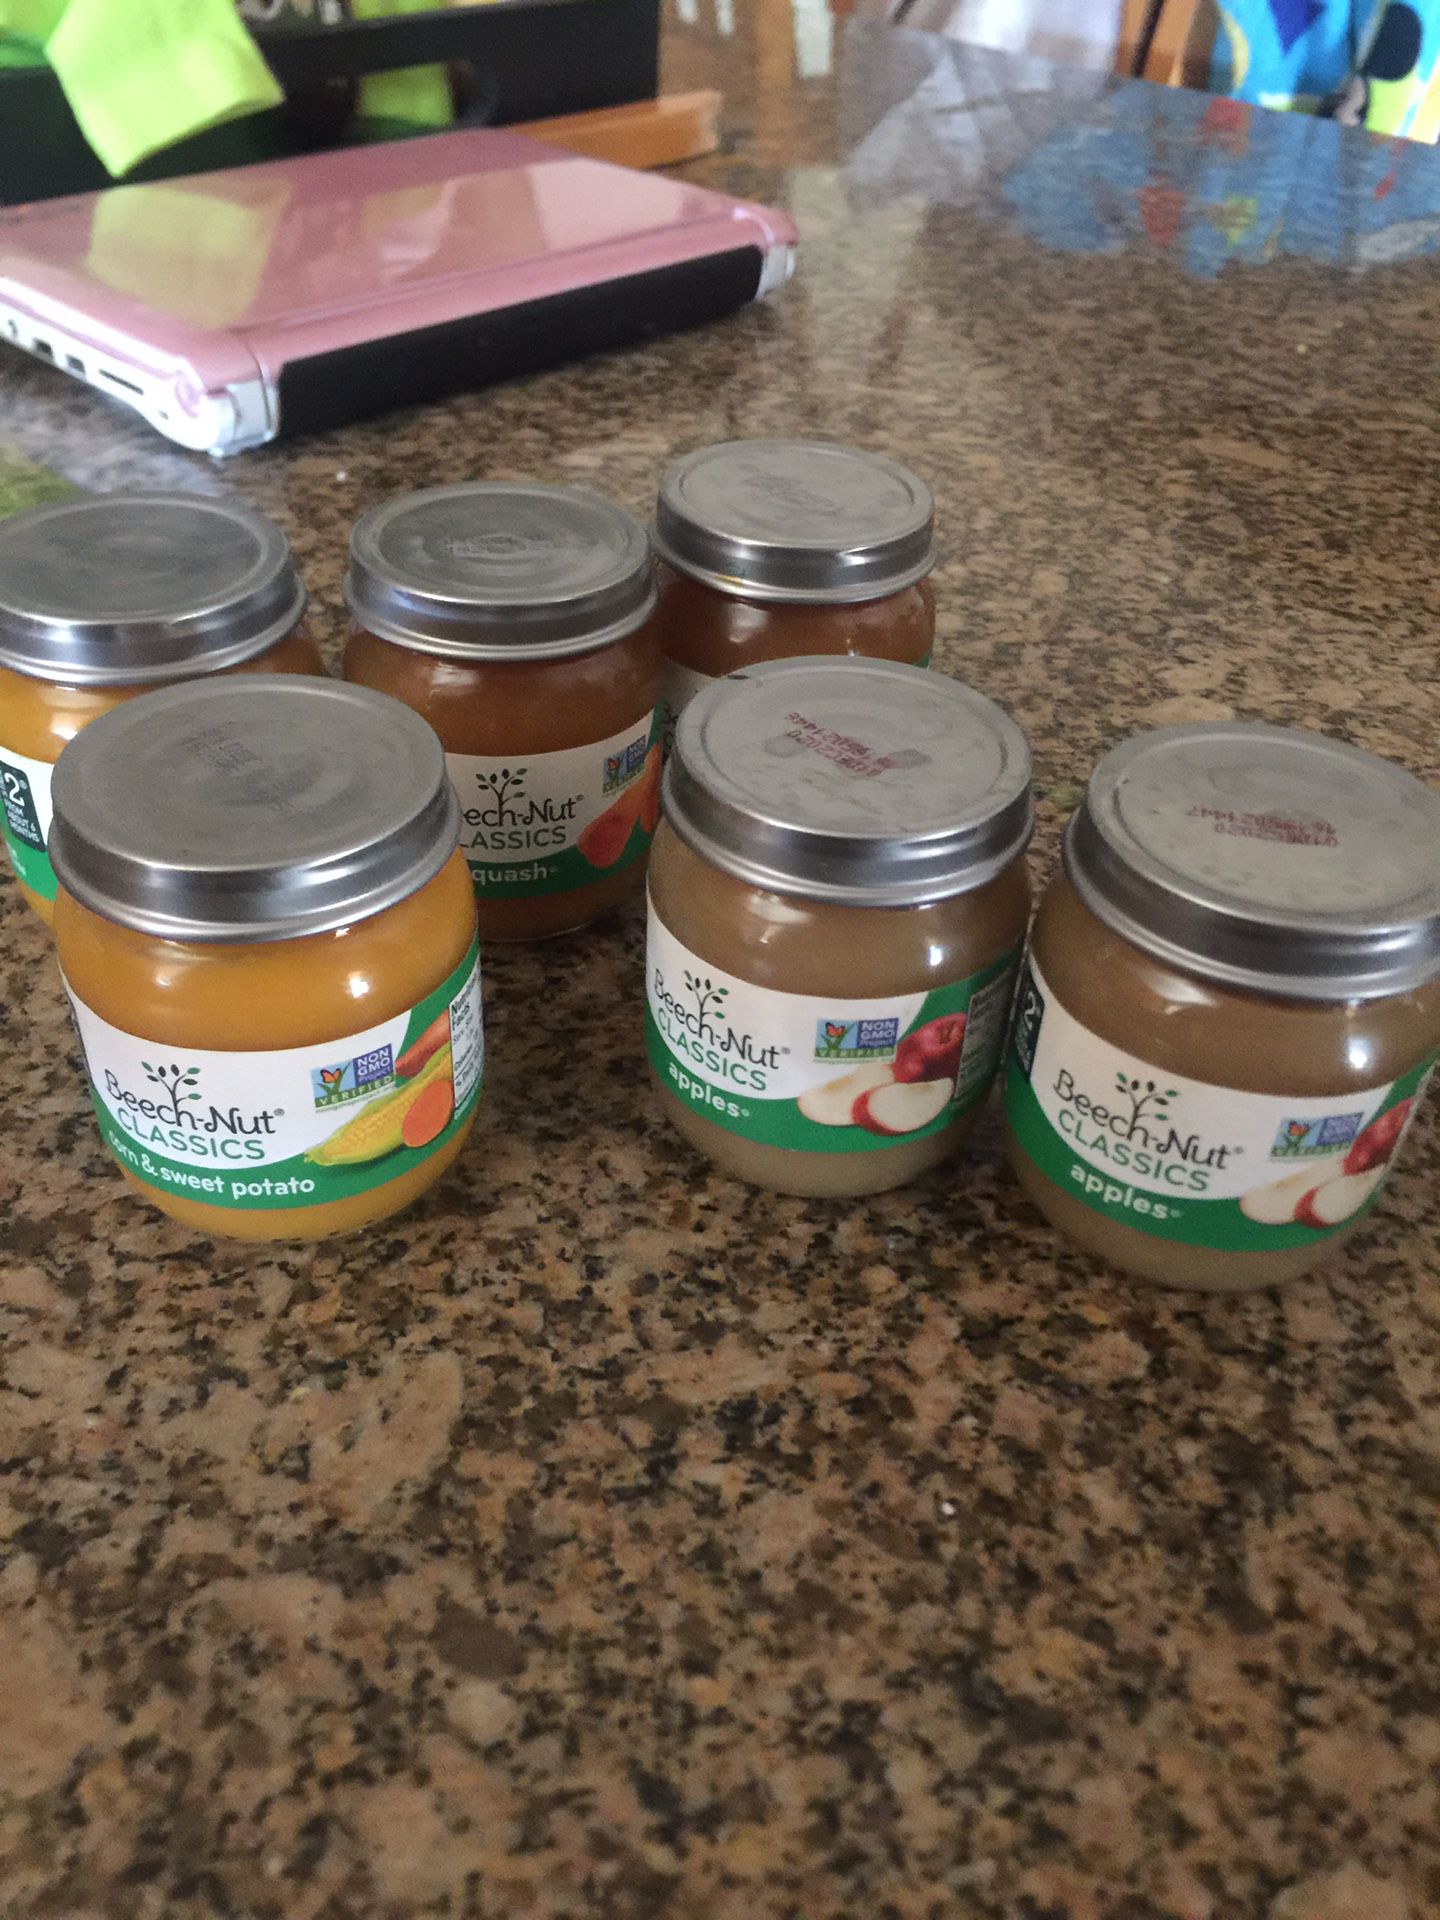 Free baby food for mom in need